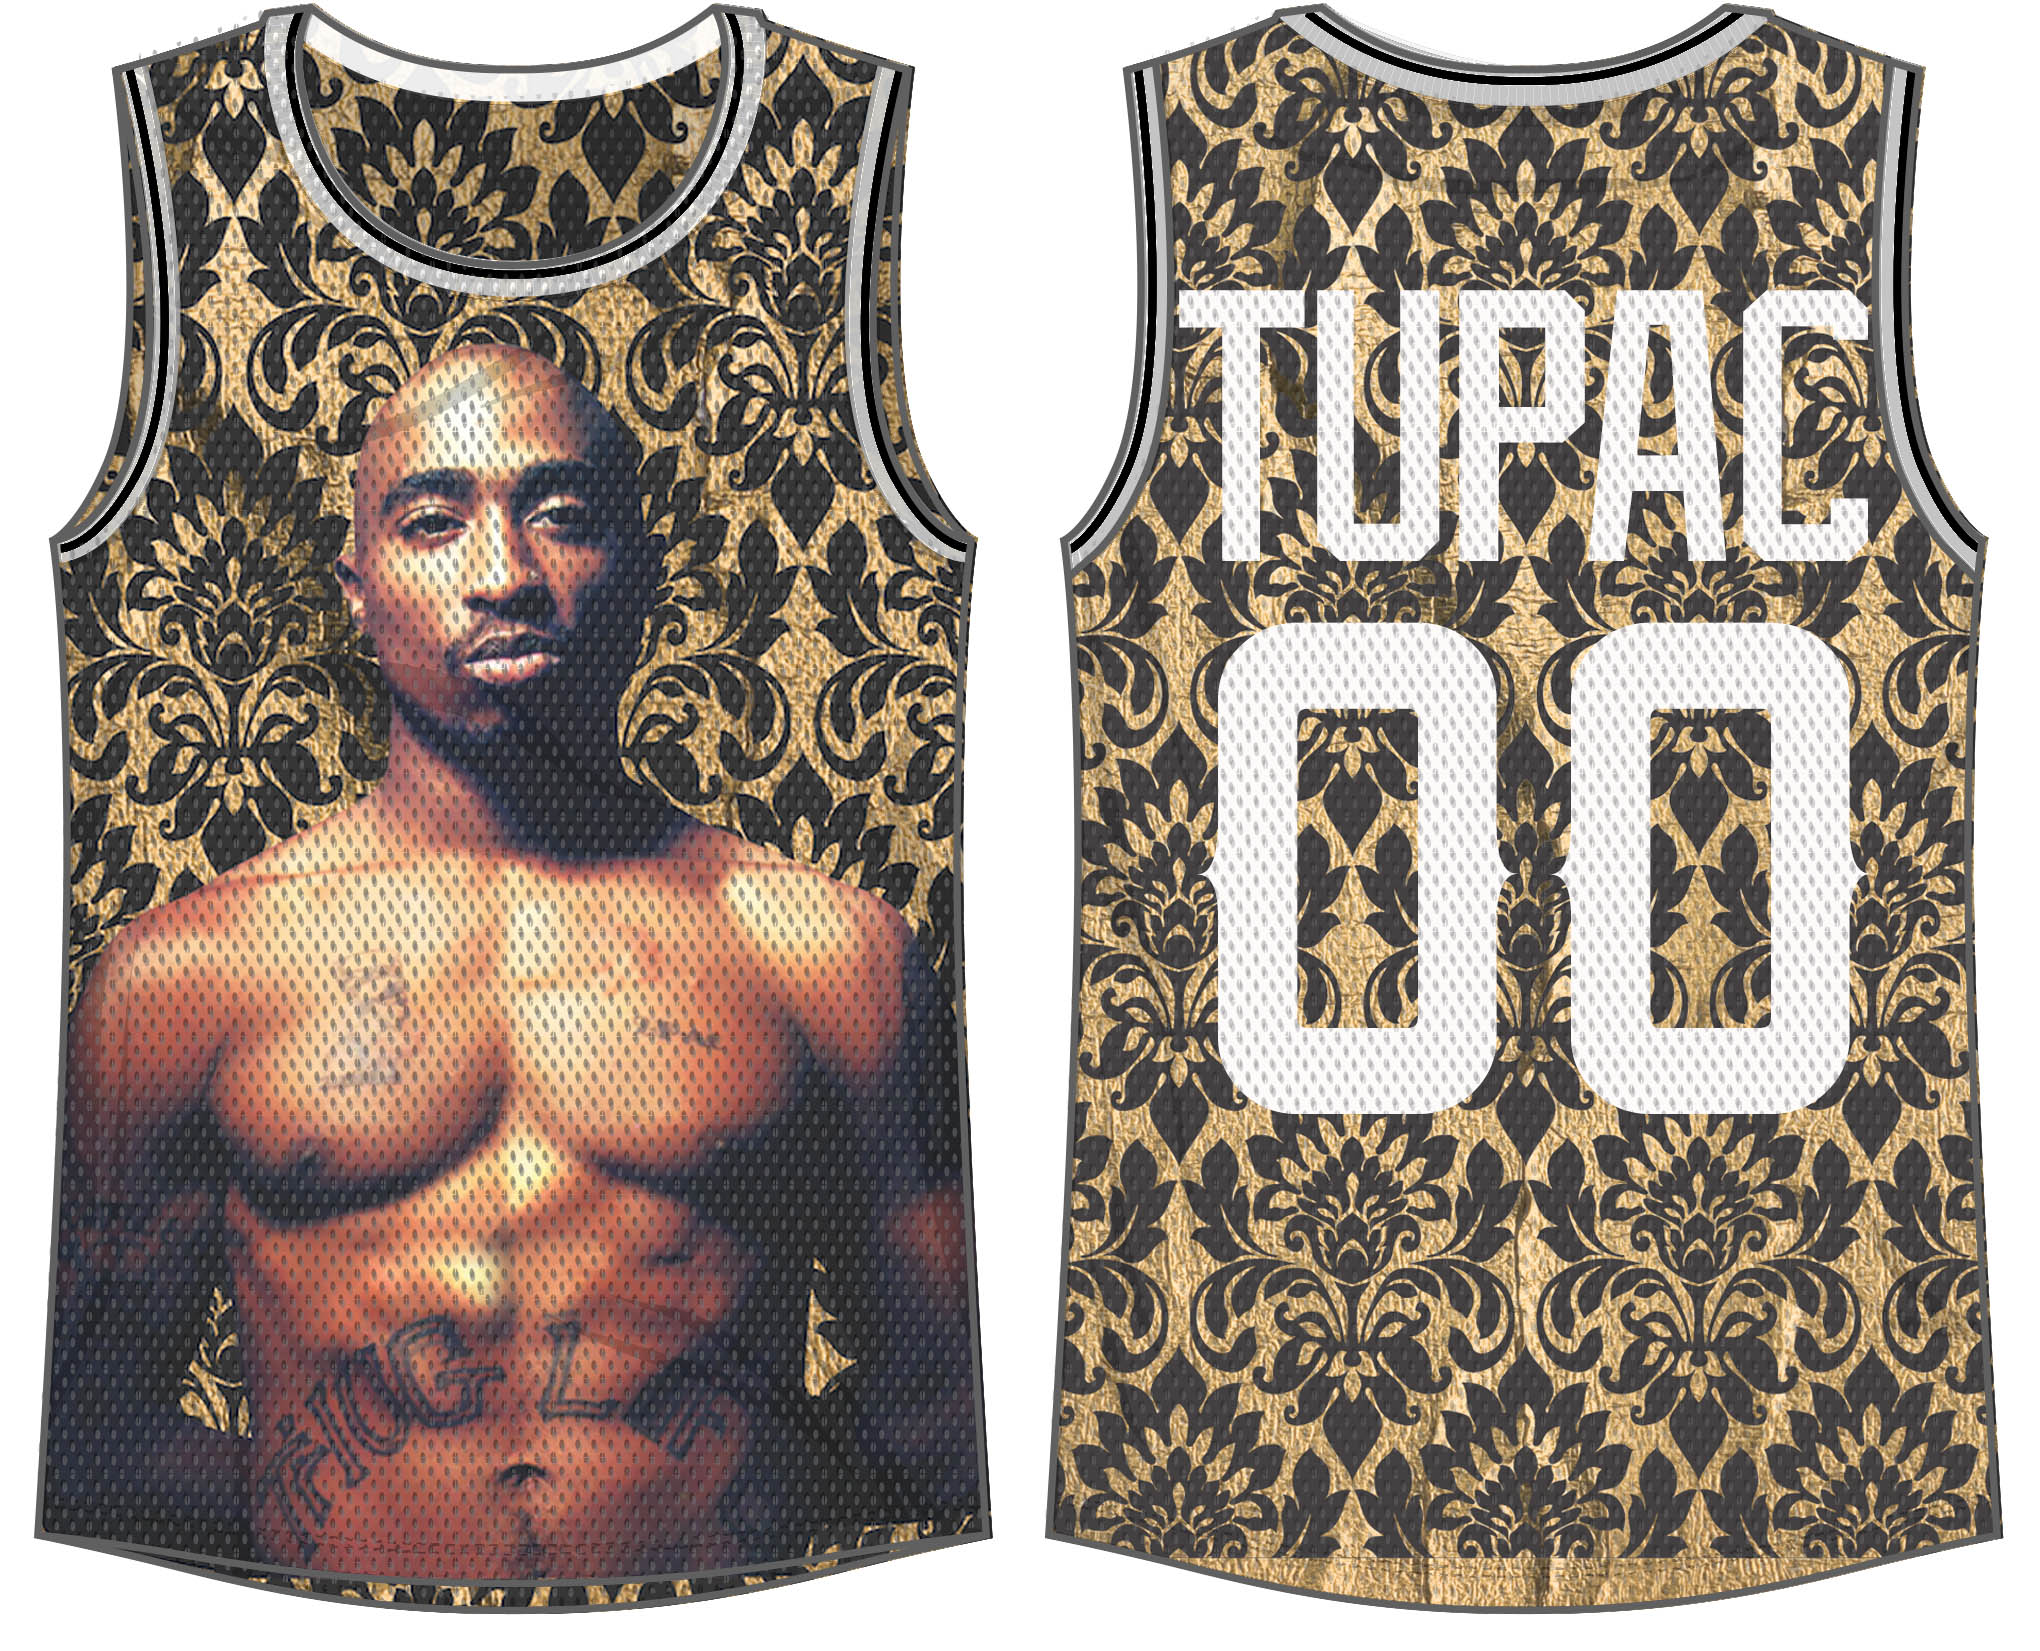 Photographer Sues Forever 21, Urban Outfitters Over Tupac T-Shirt